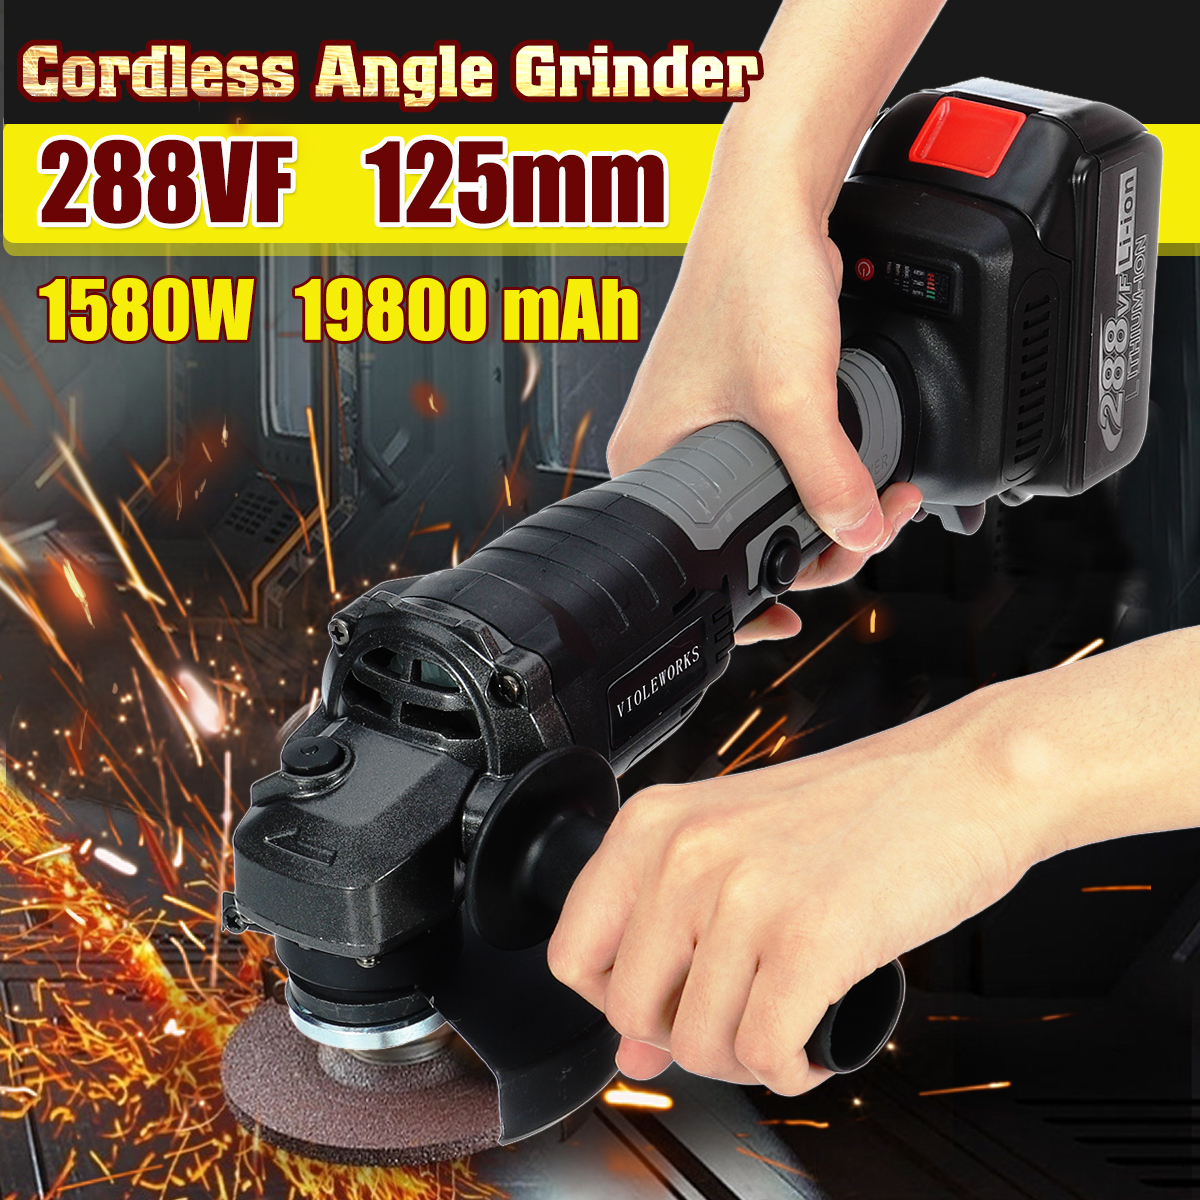 VIOLEWORKS-288VF-125mm-Cordless-Angle-Grinder-3-Gears-Brushless-Electric-Metal-Stone-Wood-Cutting-Po-1839464-1